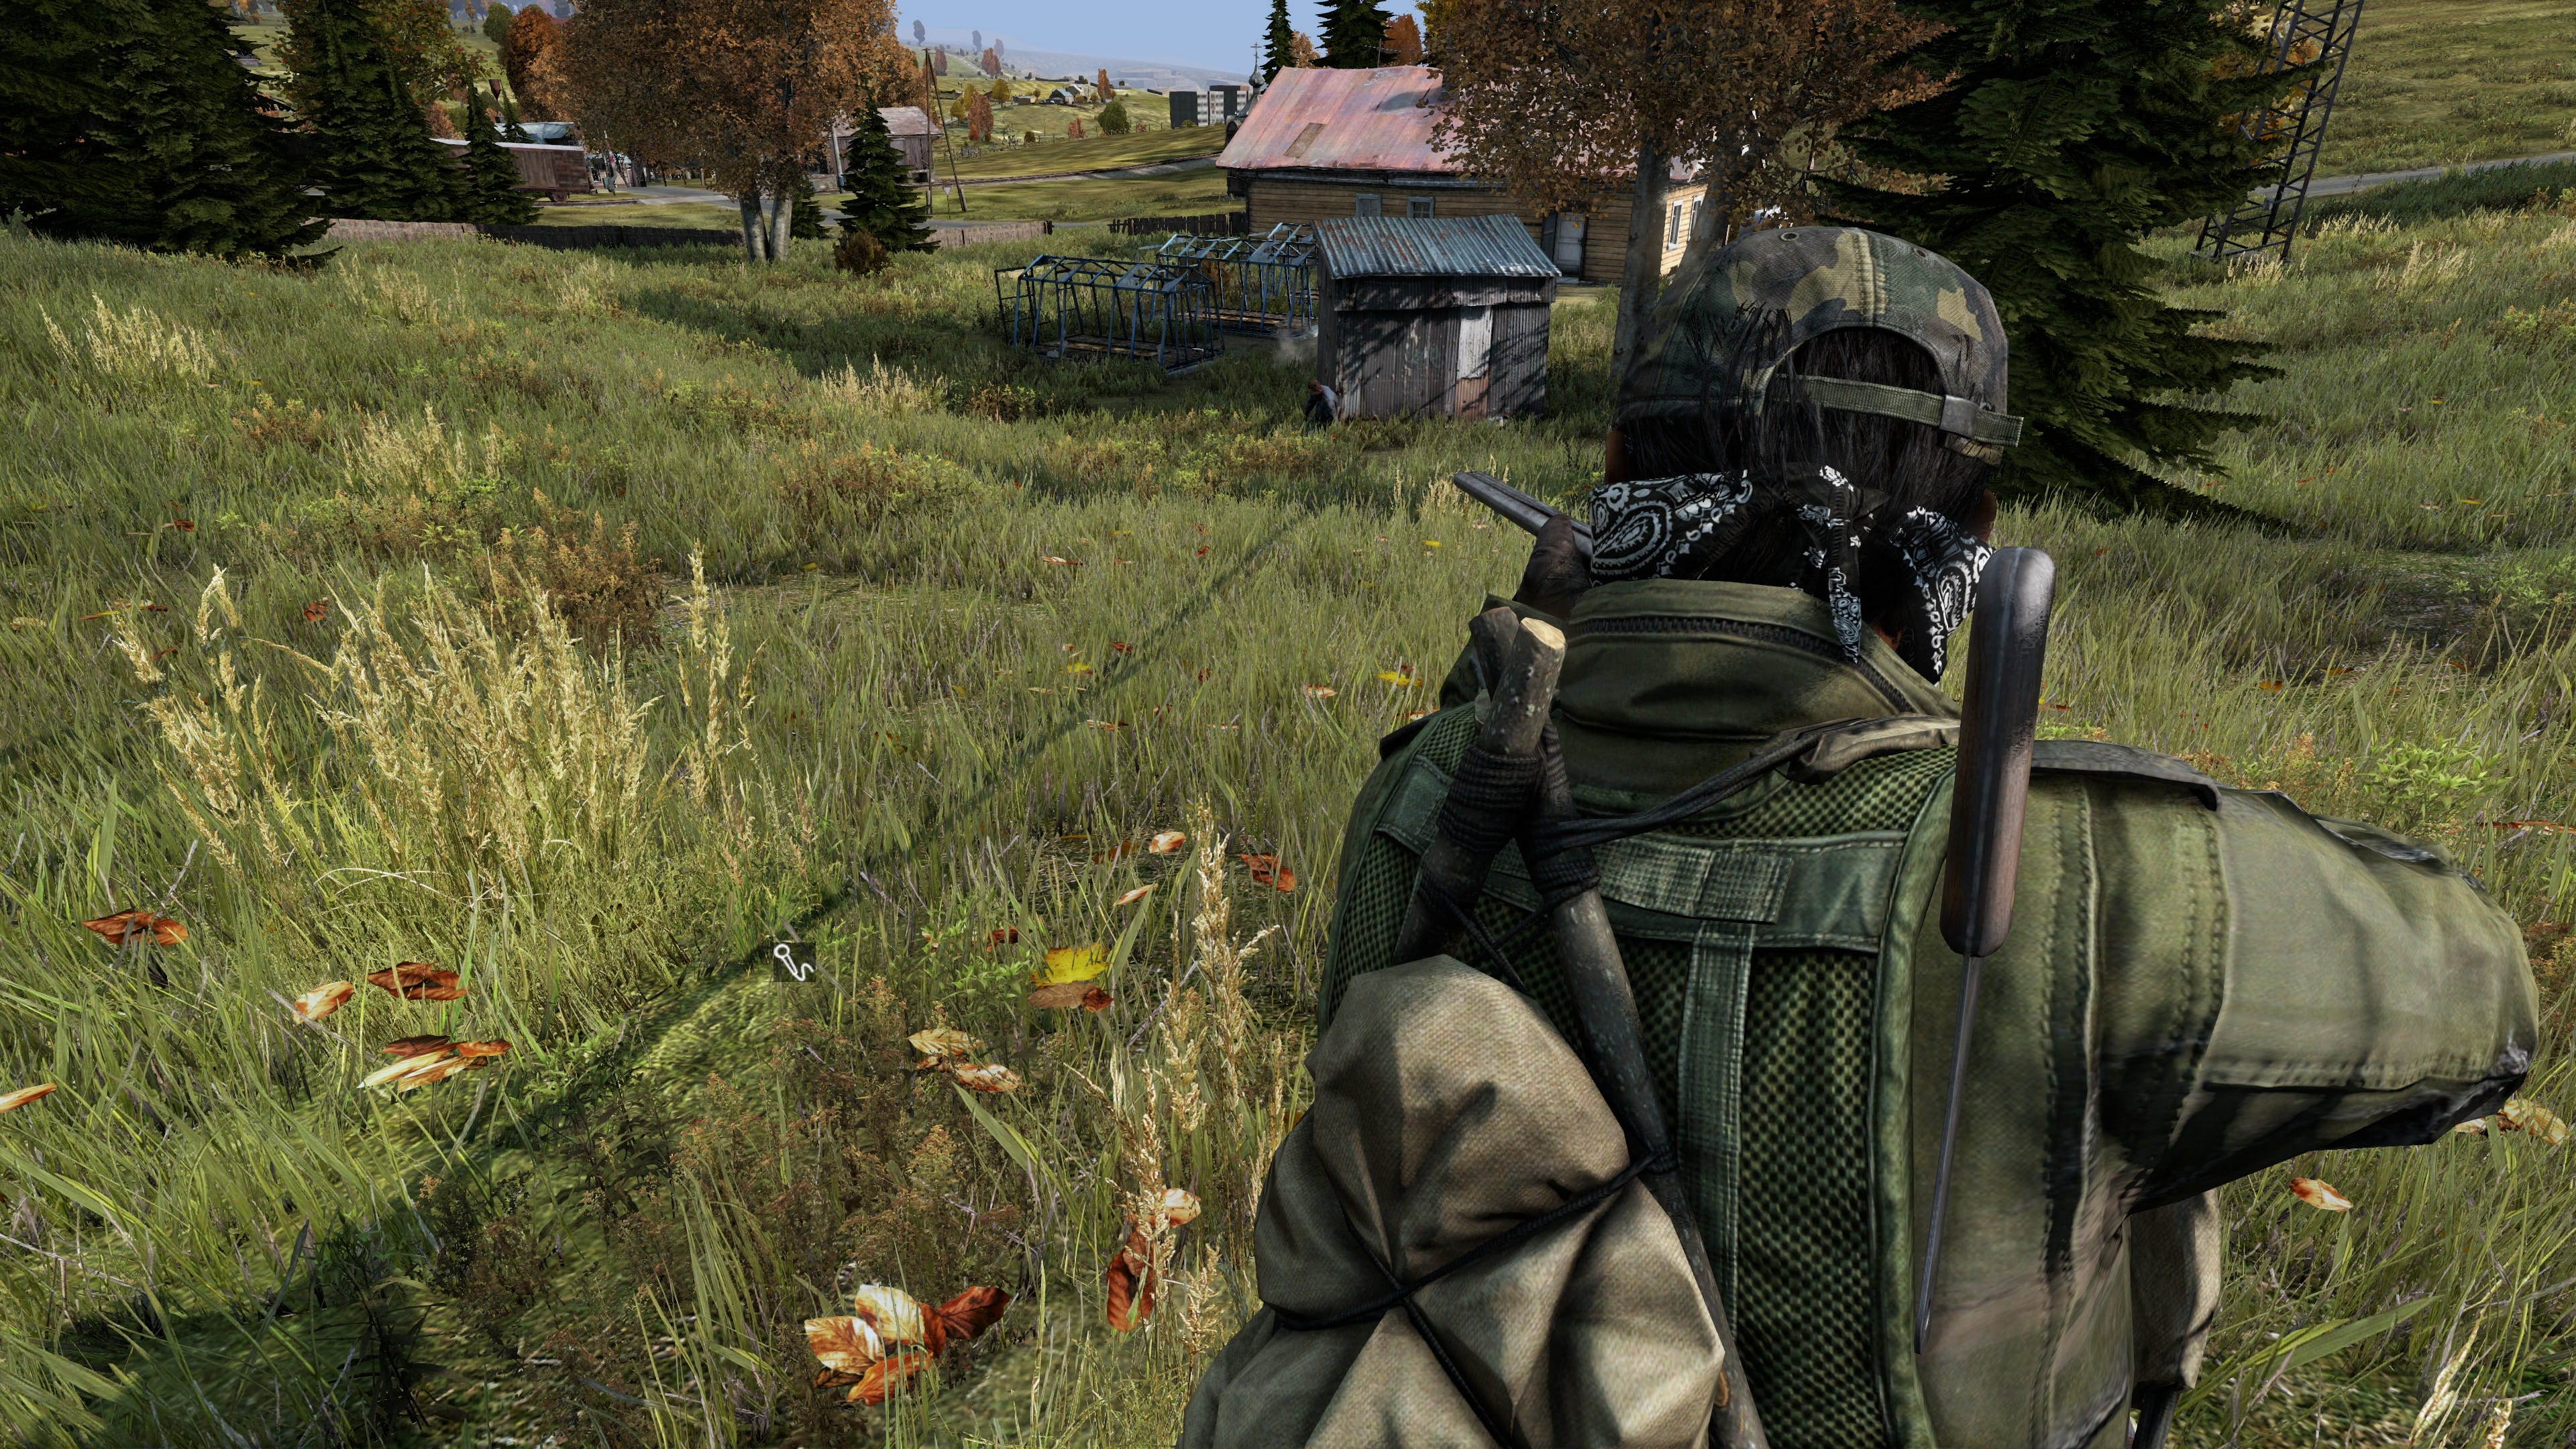 Does DayZ have crossplay?